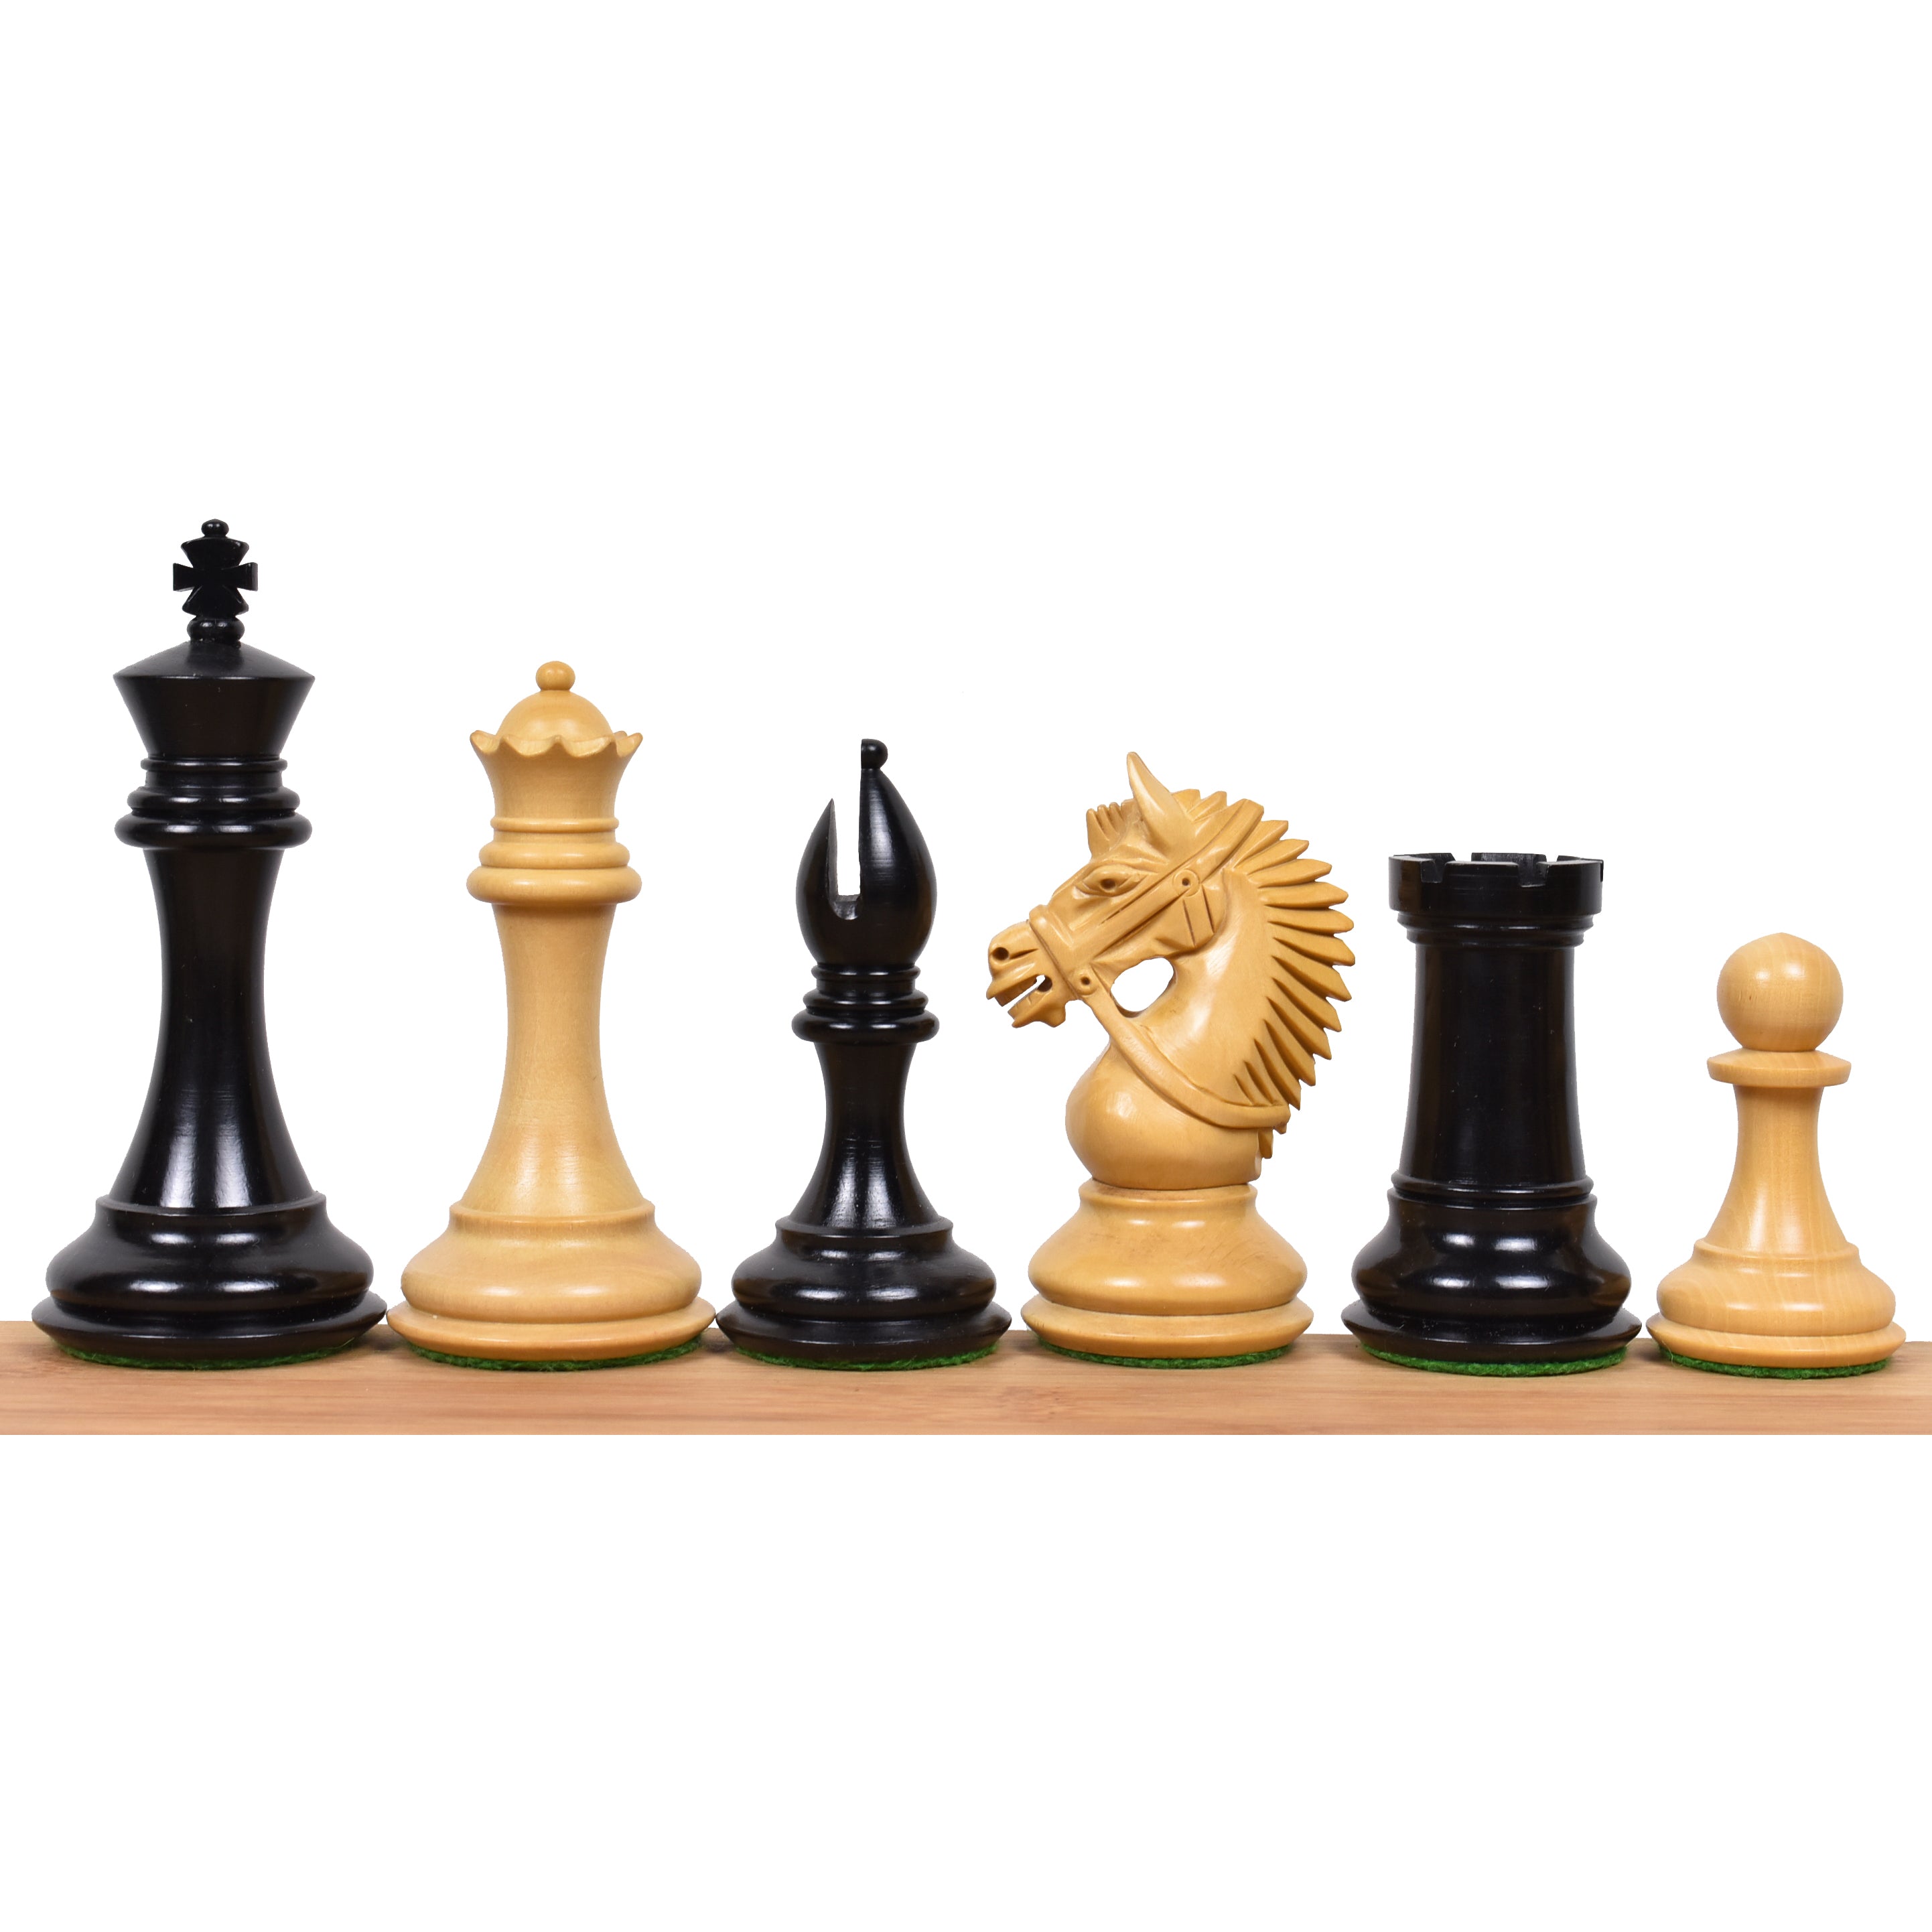 Slightly Imperfect 4.2" American Staunton Luxury Chess Set - Chess Pieces Only - Triple Weighted Ebony Wood